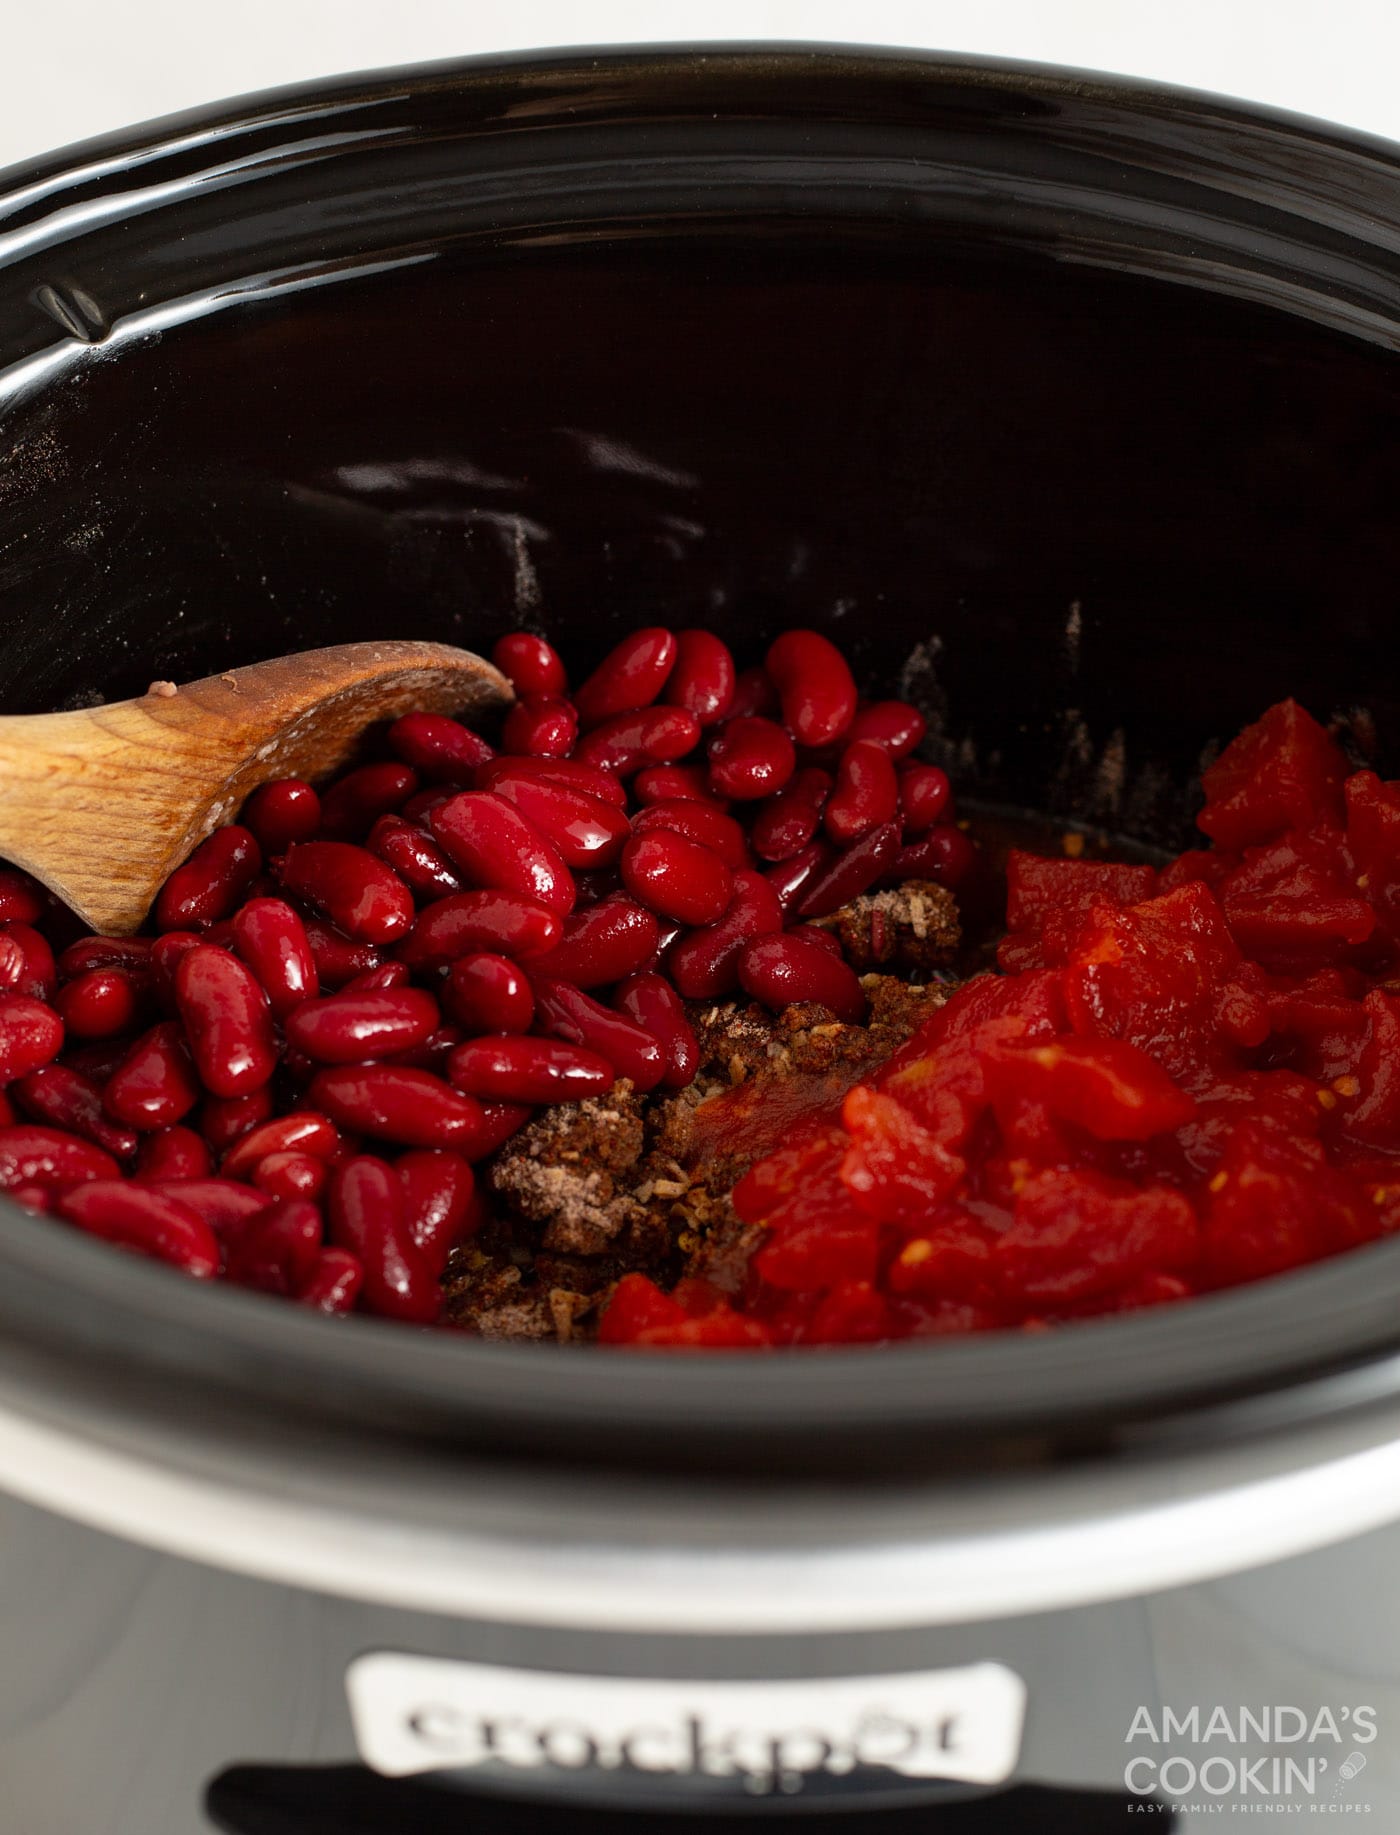 chili ingredients in a crockpot